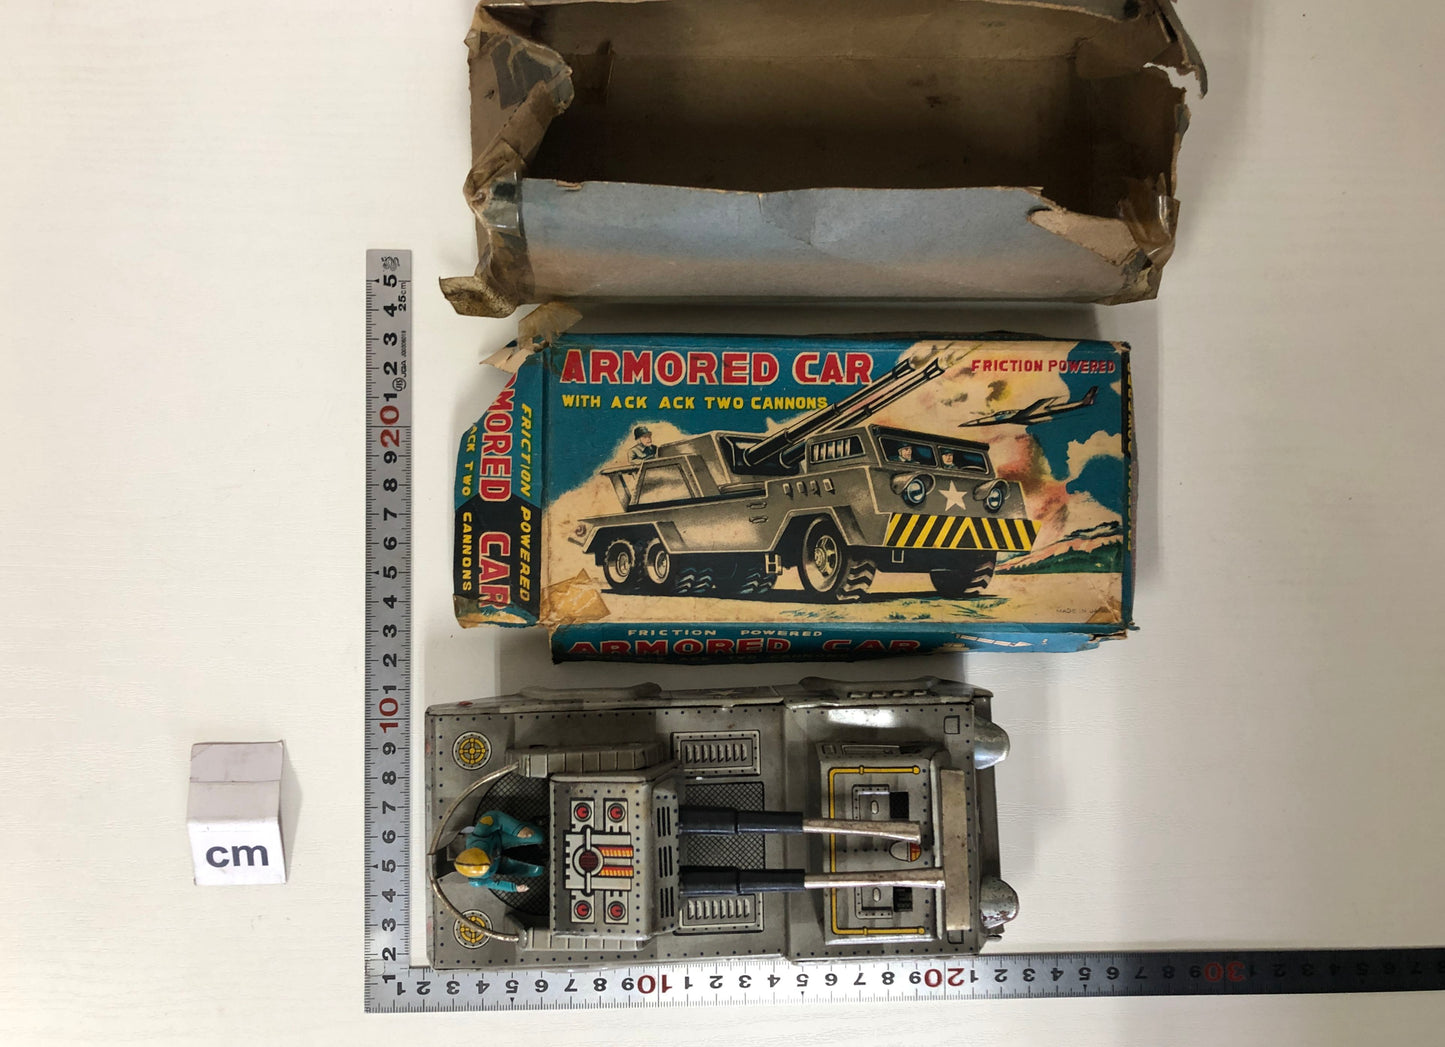 Y3971 TIN TOY Tank armored car combat vehicle box Japanese antique vintage